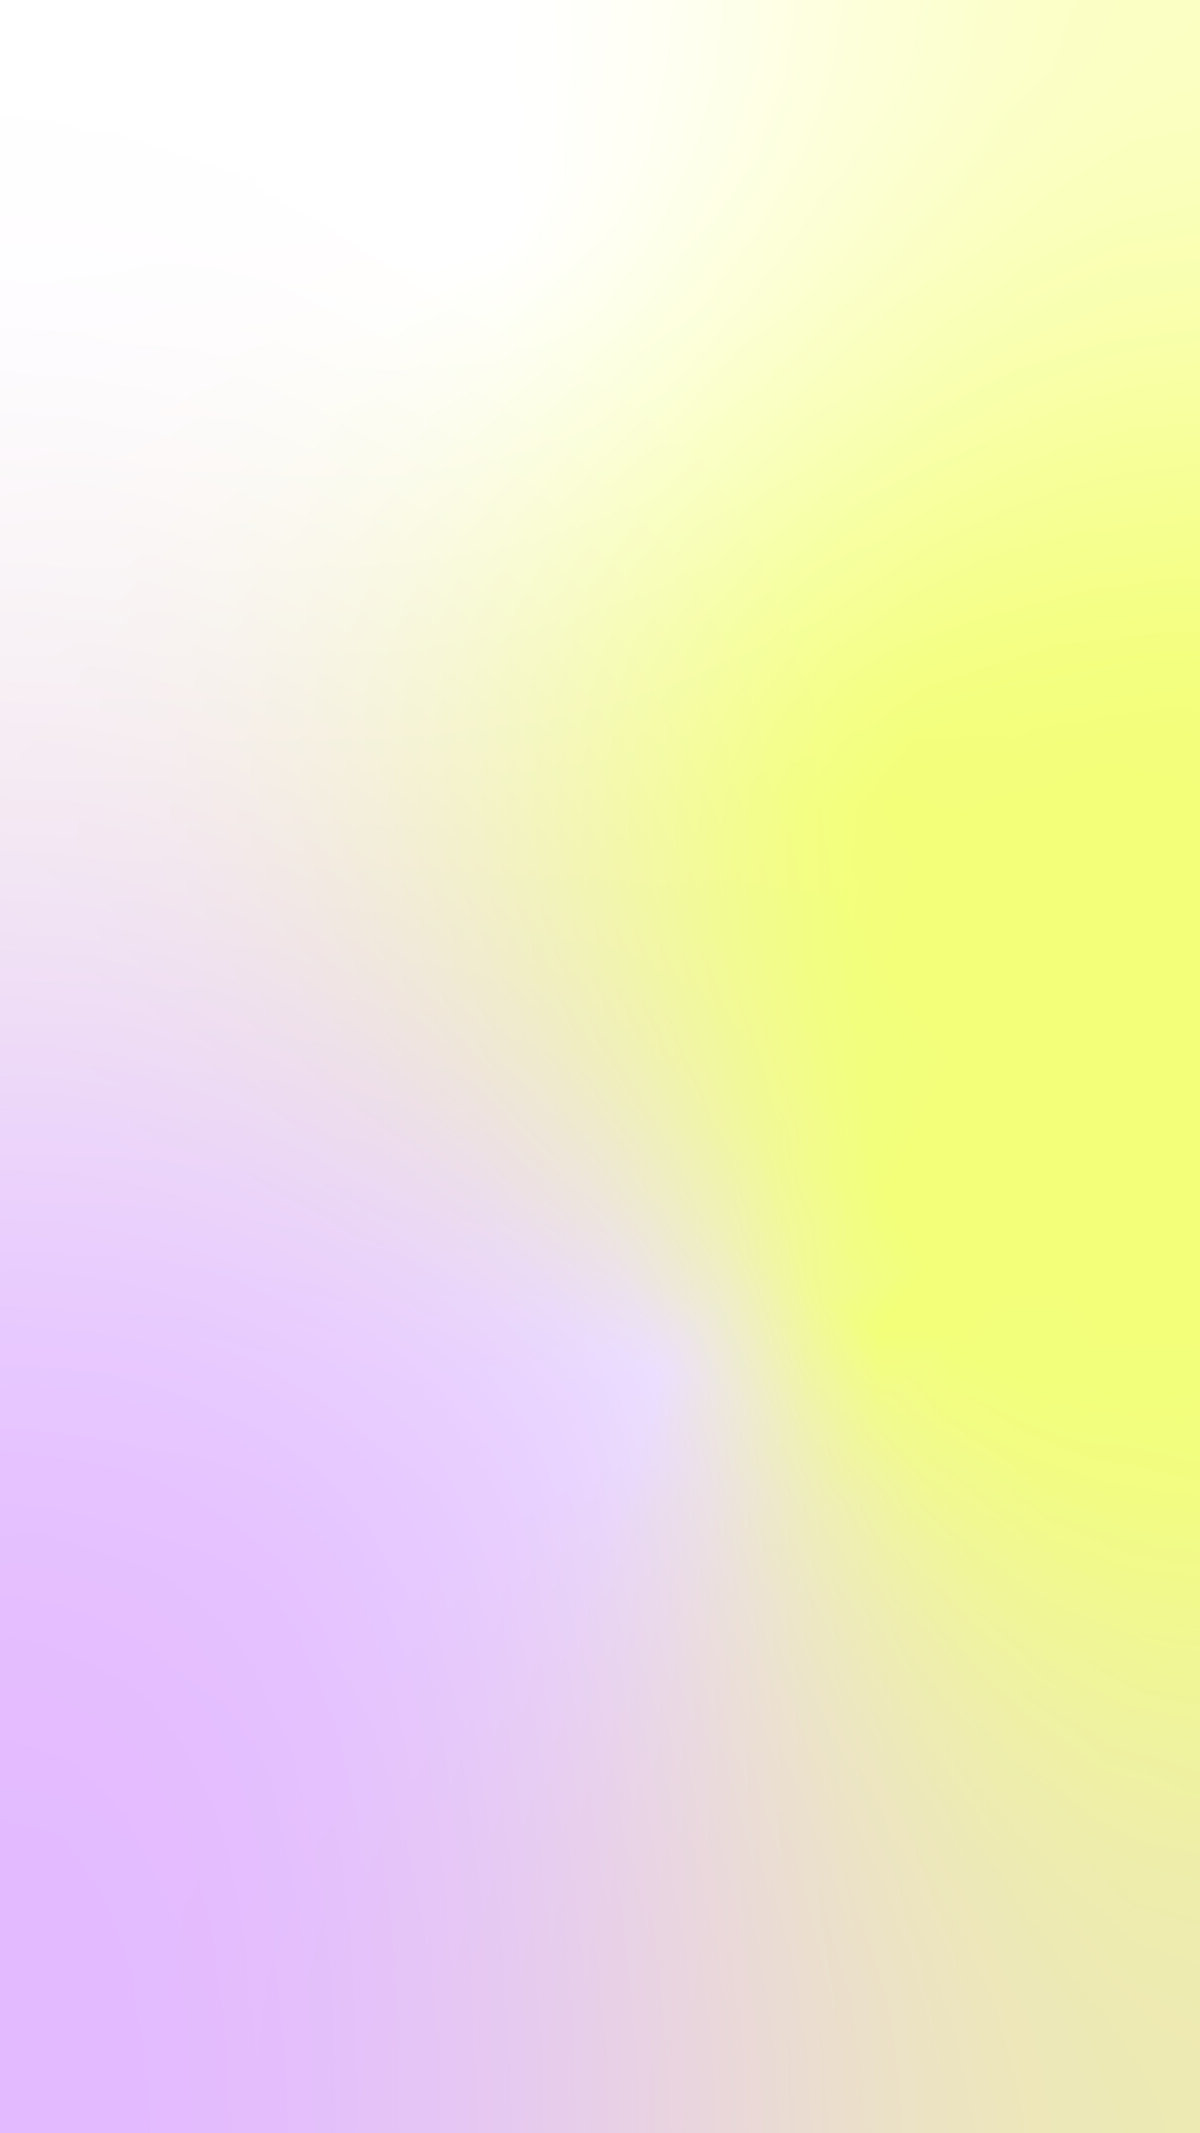 The Called Career brand texture purple and yellow gradient